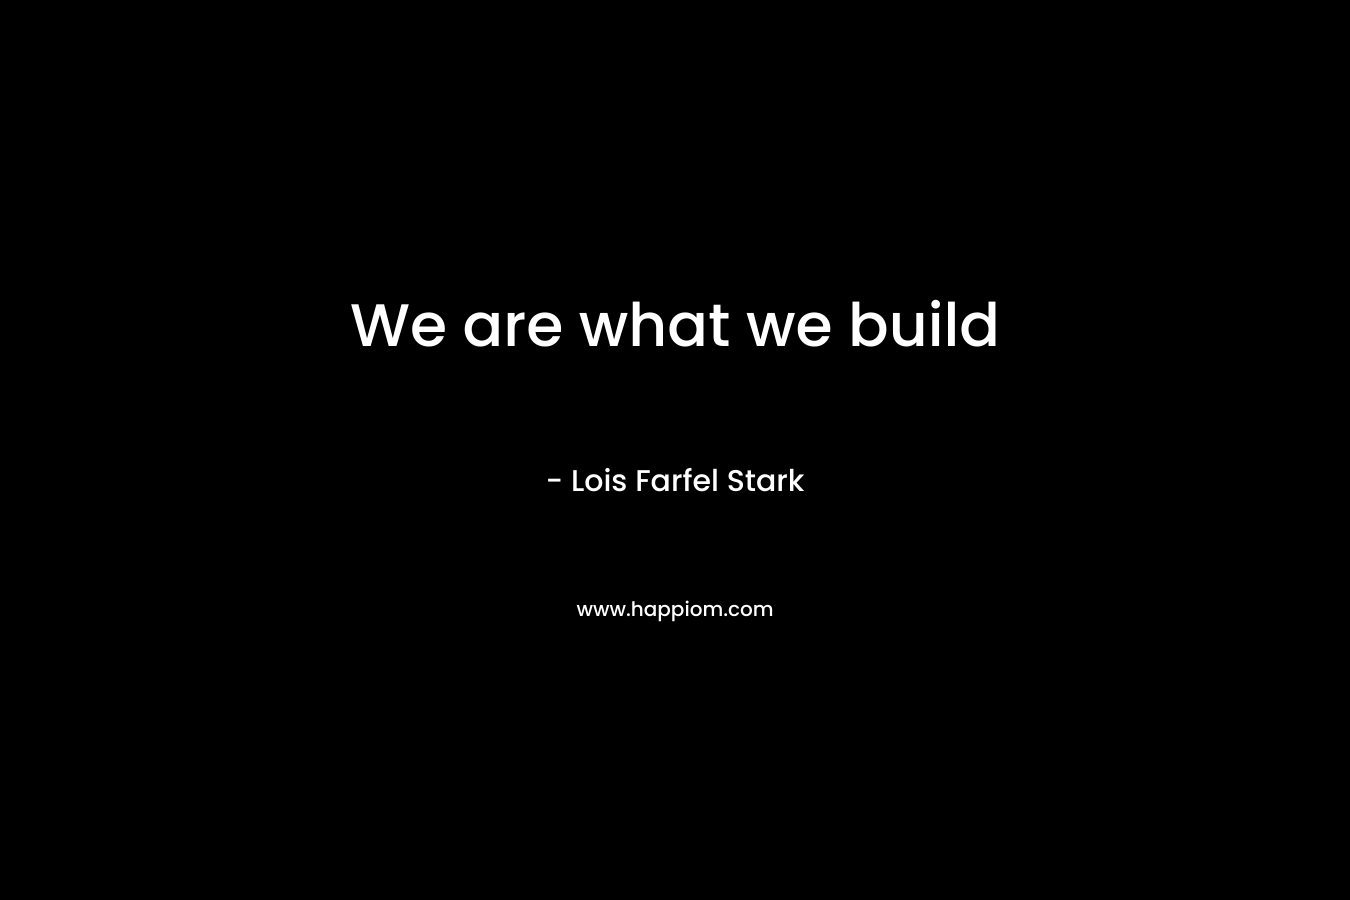 We are what we build